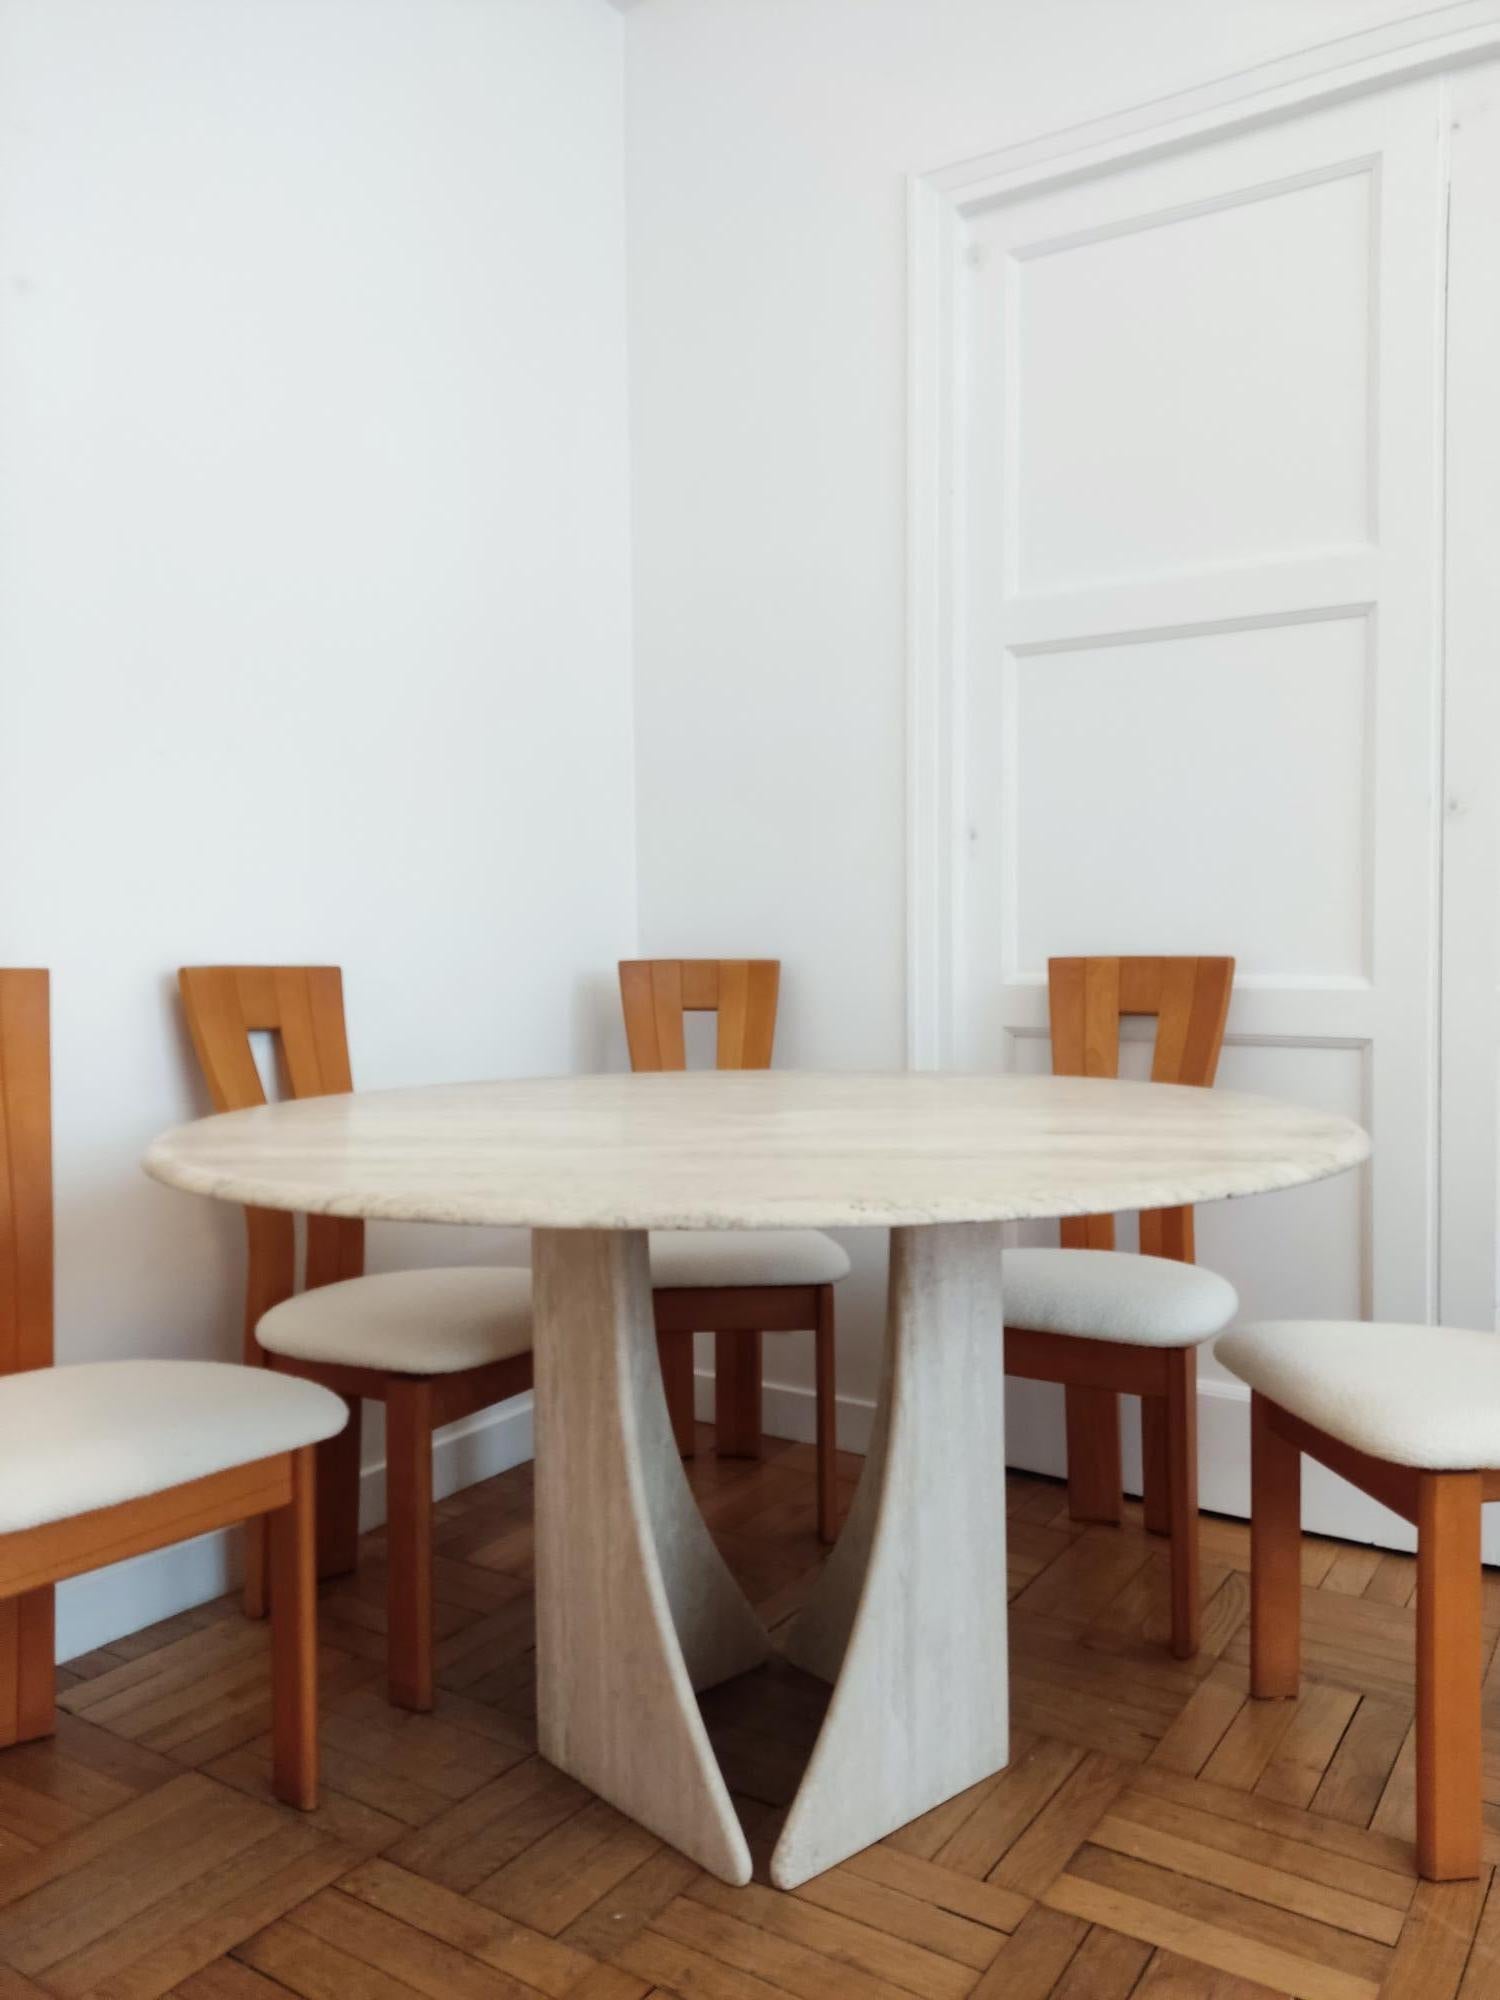 Rare round travertine dining room table with a pretty grain and a helix leg with 6 chairs from the Seltz cabinetmaker where Pierre Chapo worked. The chairs are restored in an ecru Boucle from Maison LeLièvre